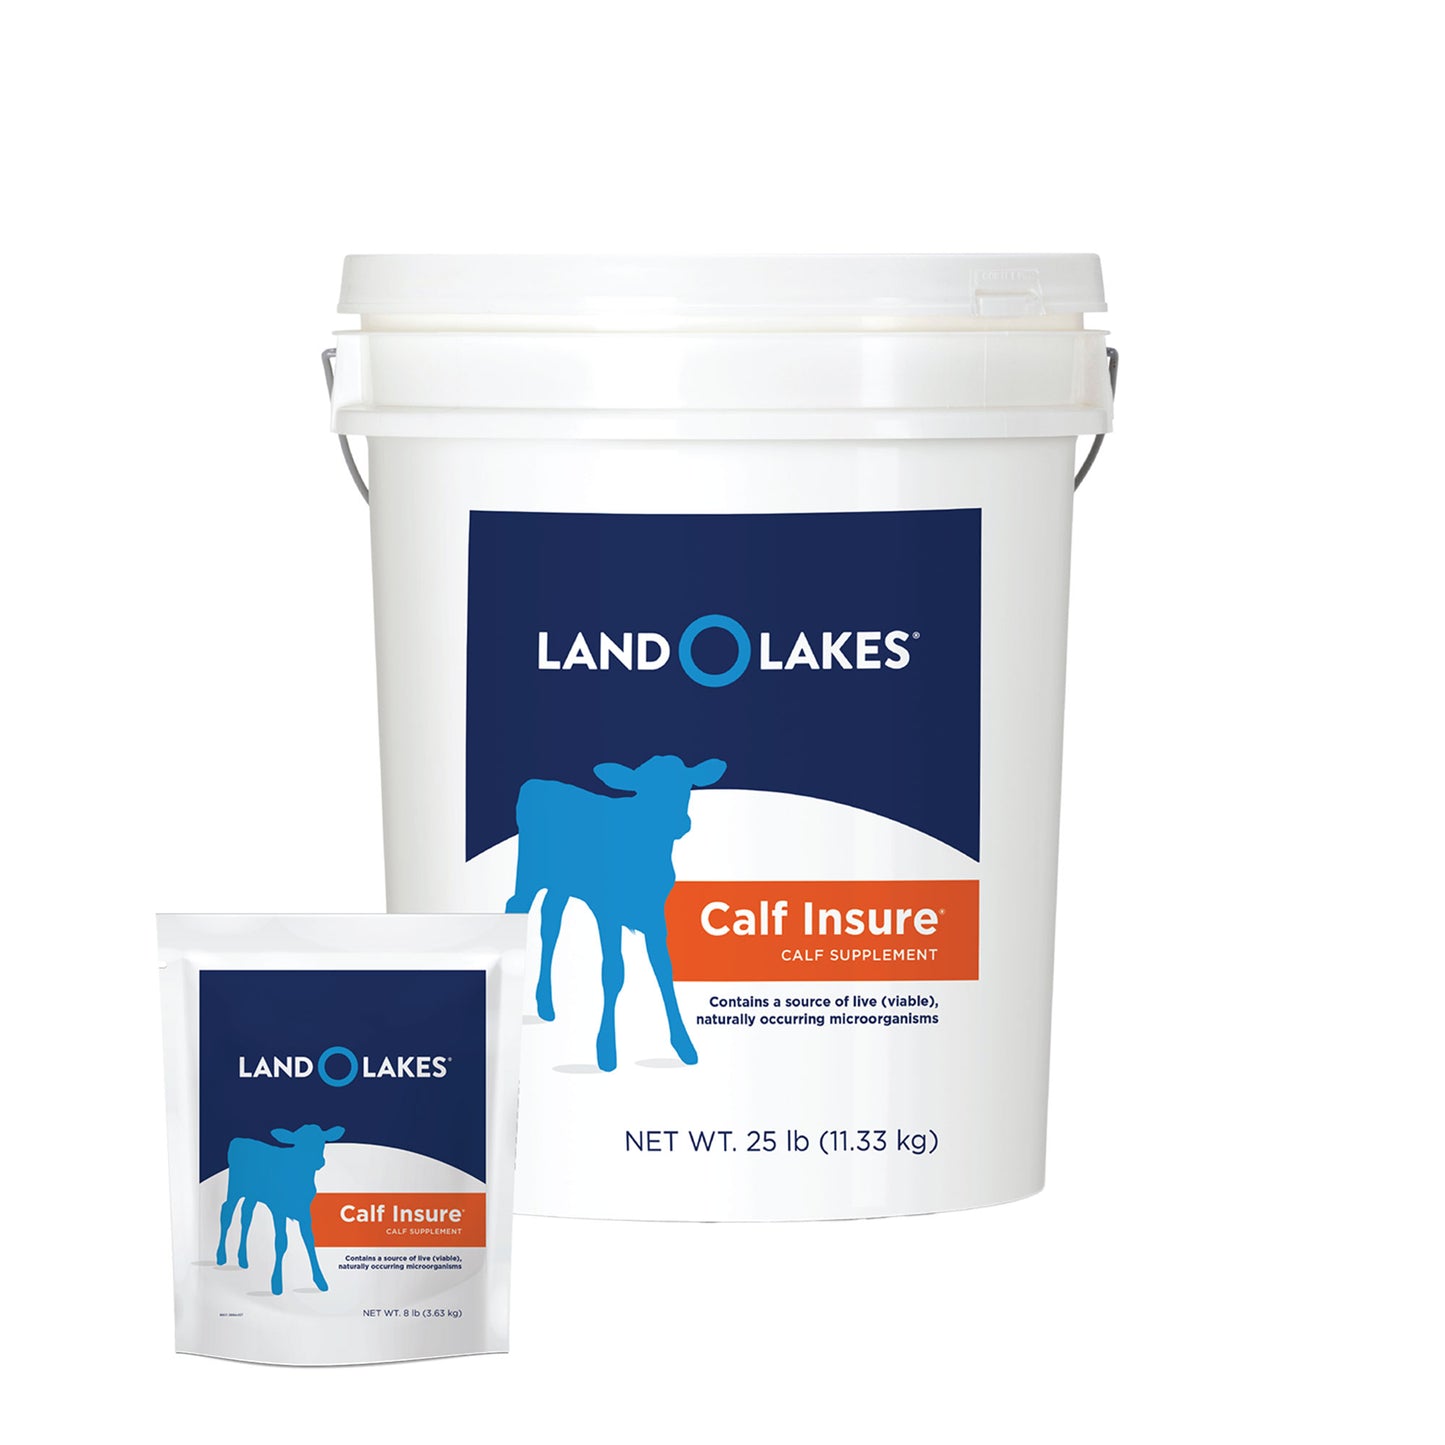 LAND O LAKES Calf Insure 25 Pound pail and 8 pound pouch grouped together